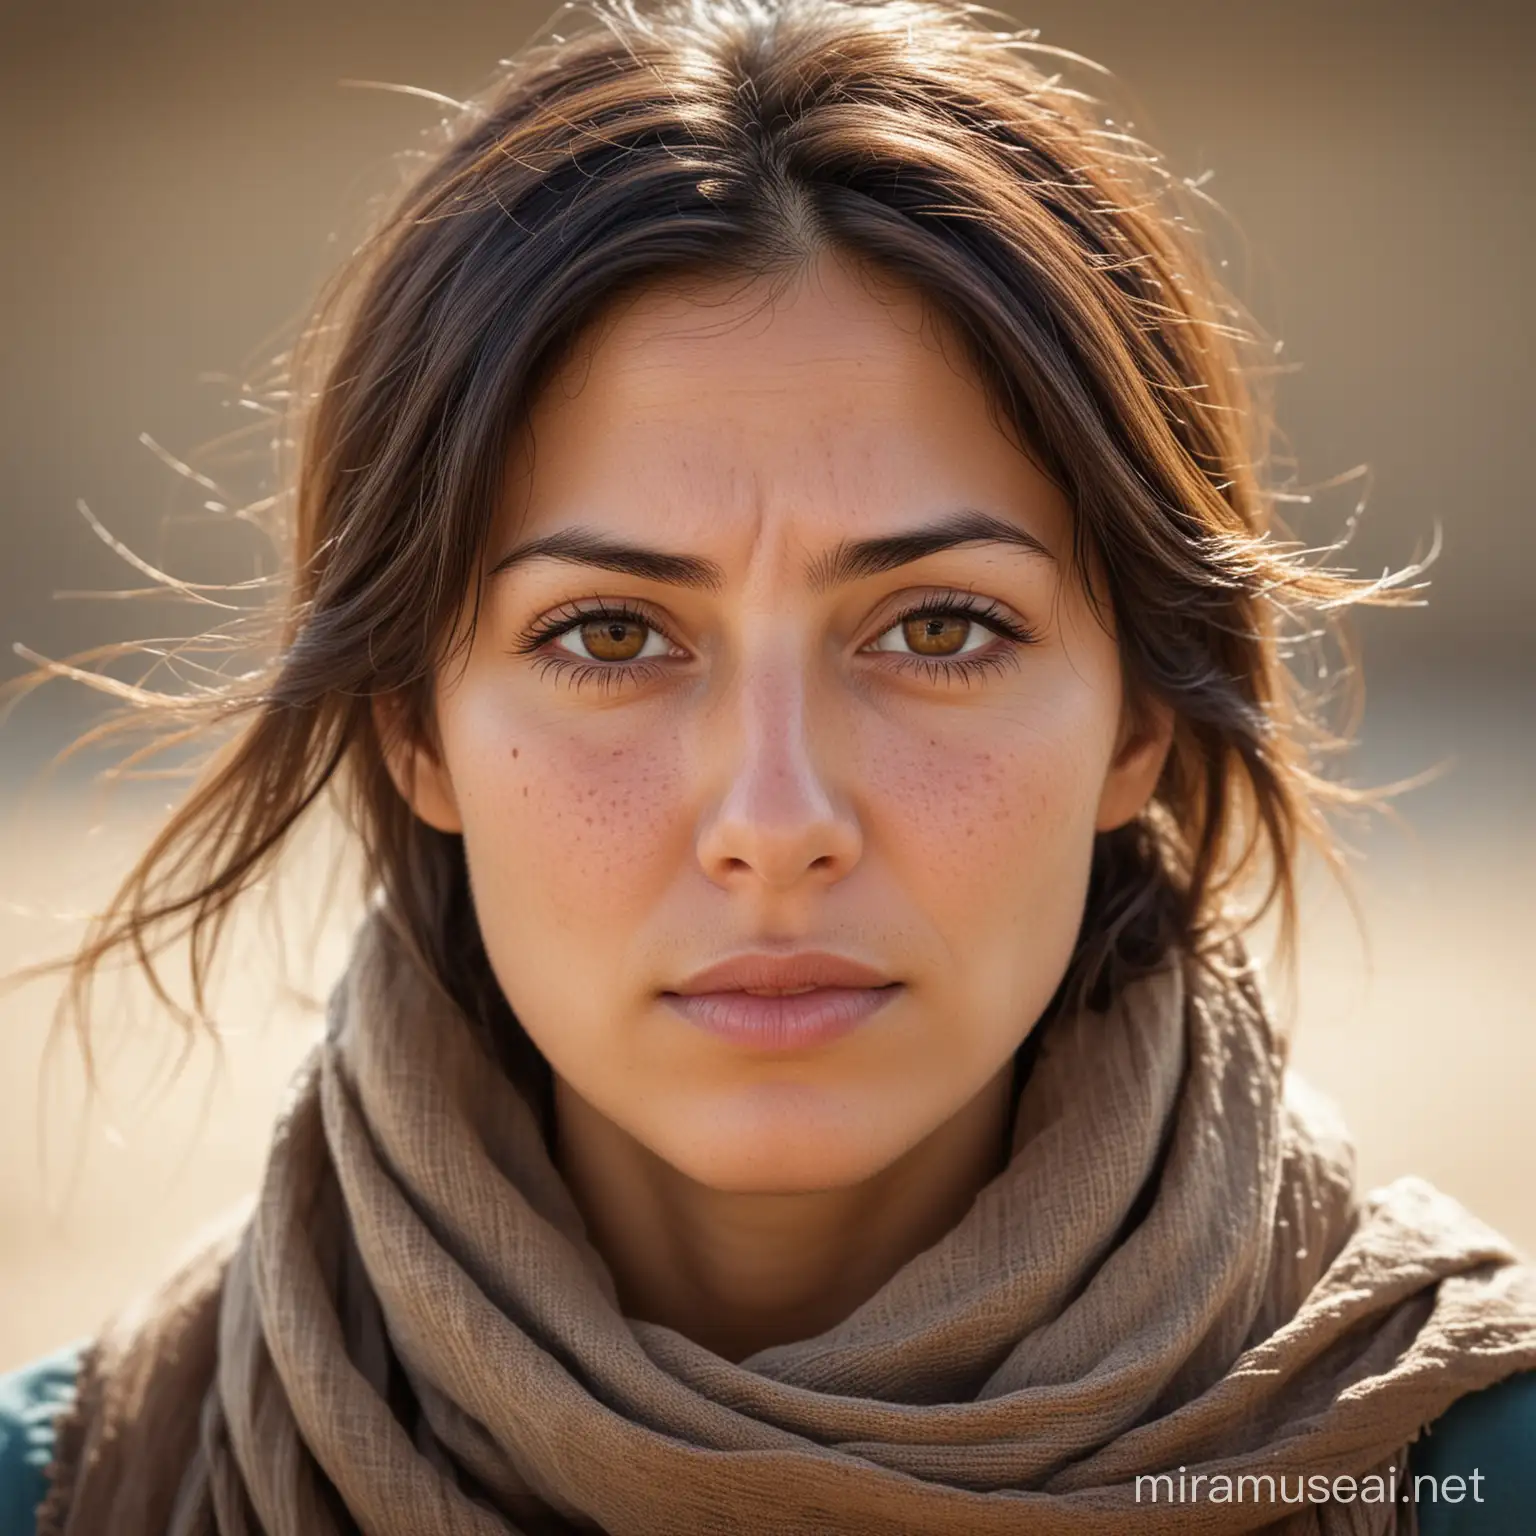 Serious Woman with Protective Scarf and SunDamaged Skin